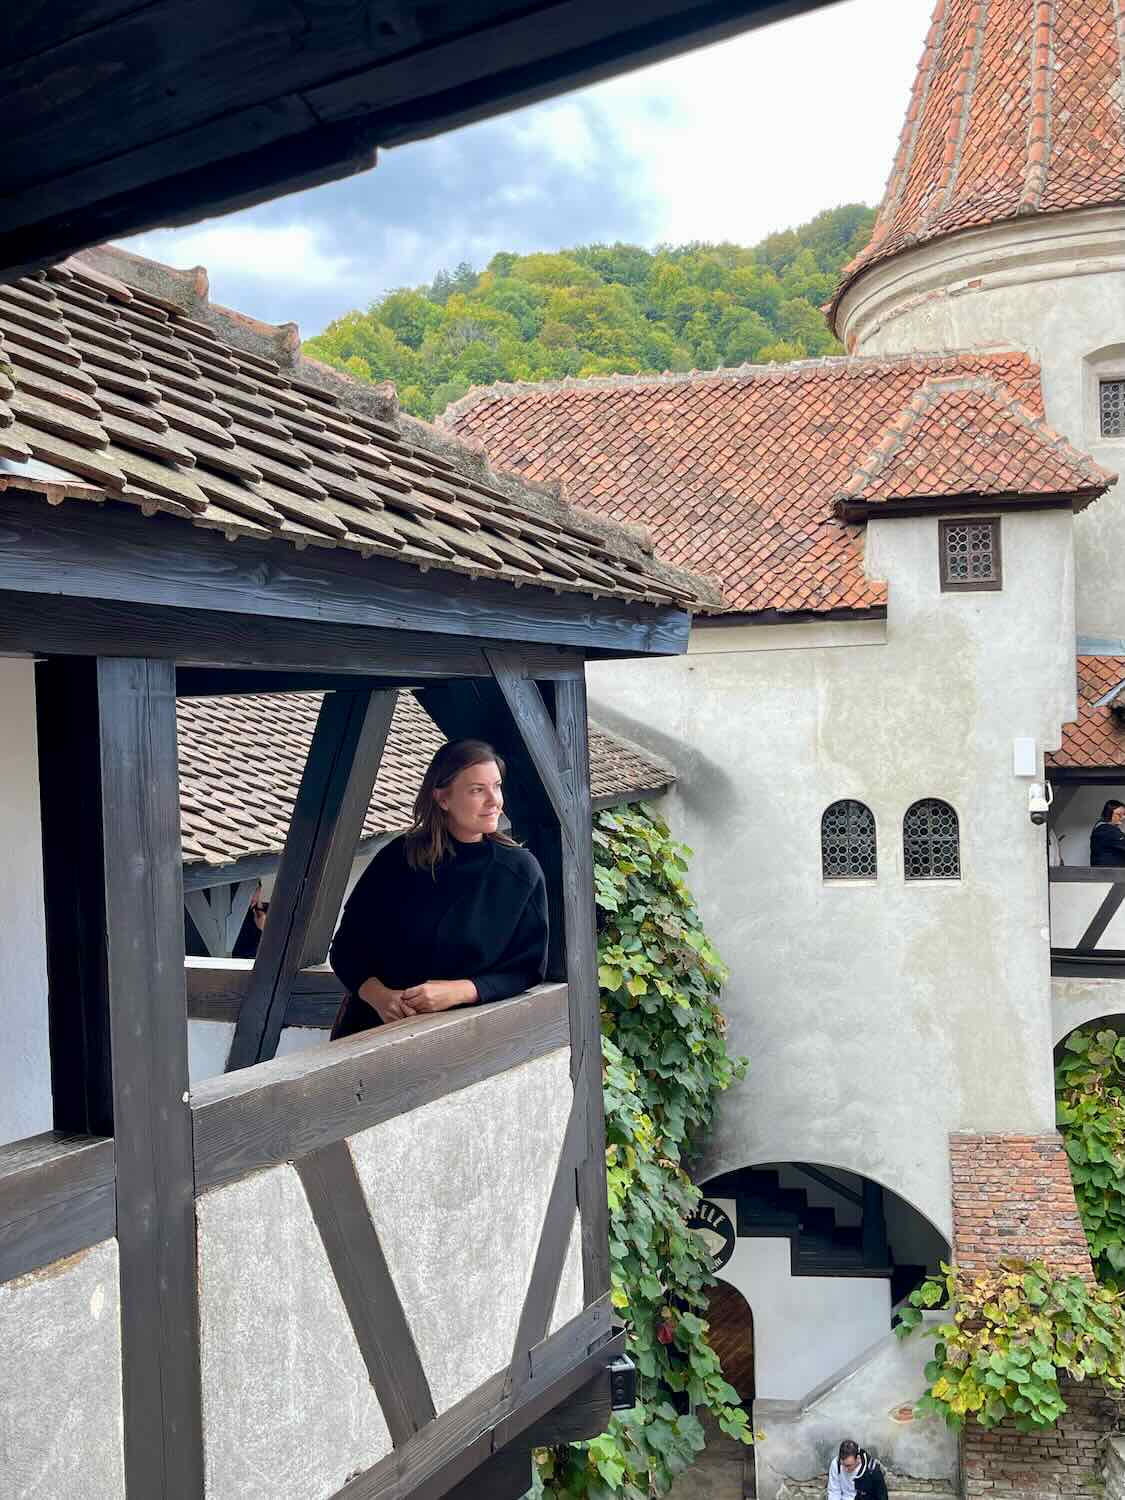 A woman gazes thoughtfully from a wooden balcony at Bran Castle, with the ancient rooftops and dense green forests in the background, offering a personal perspective of the historic site.